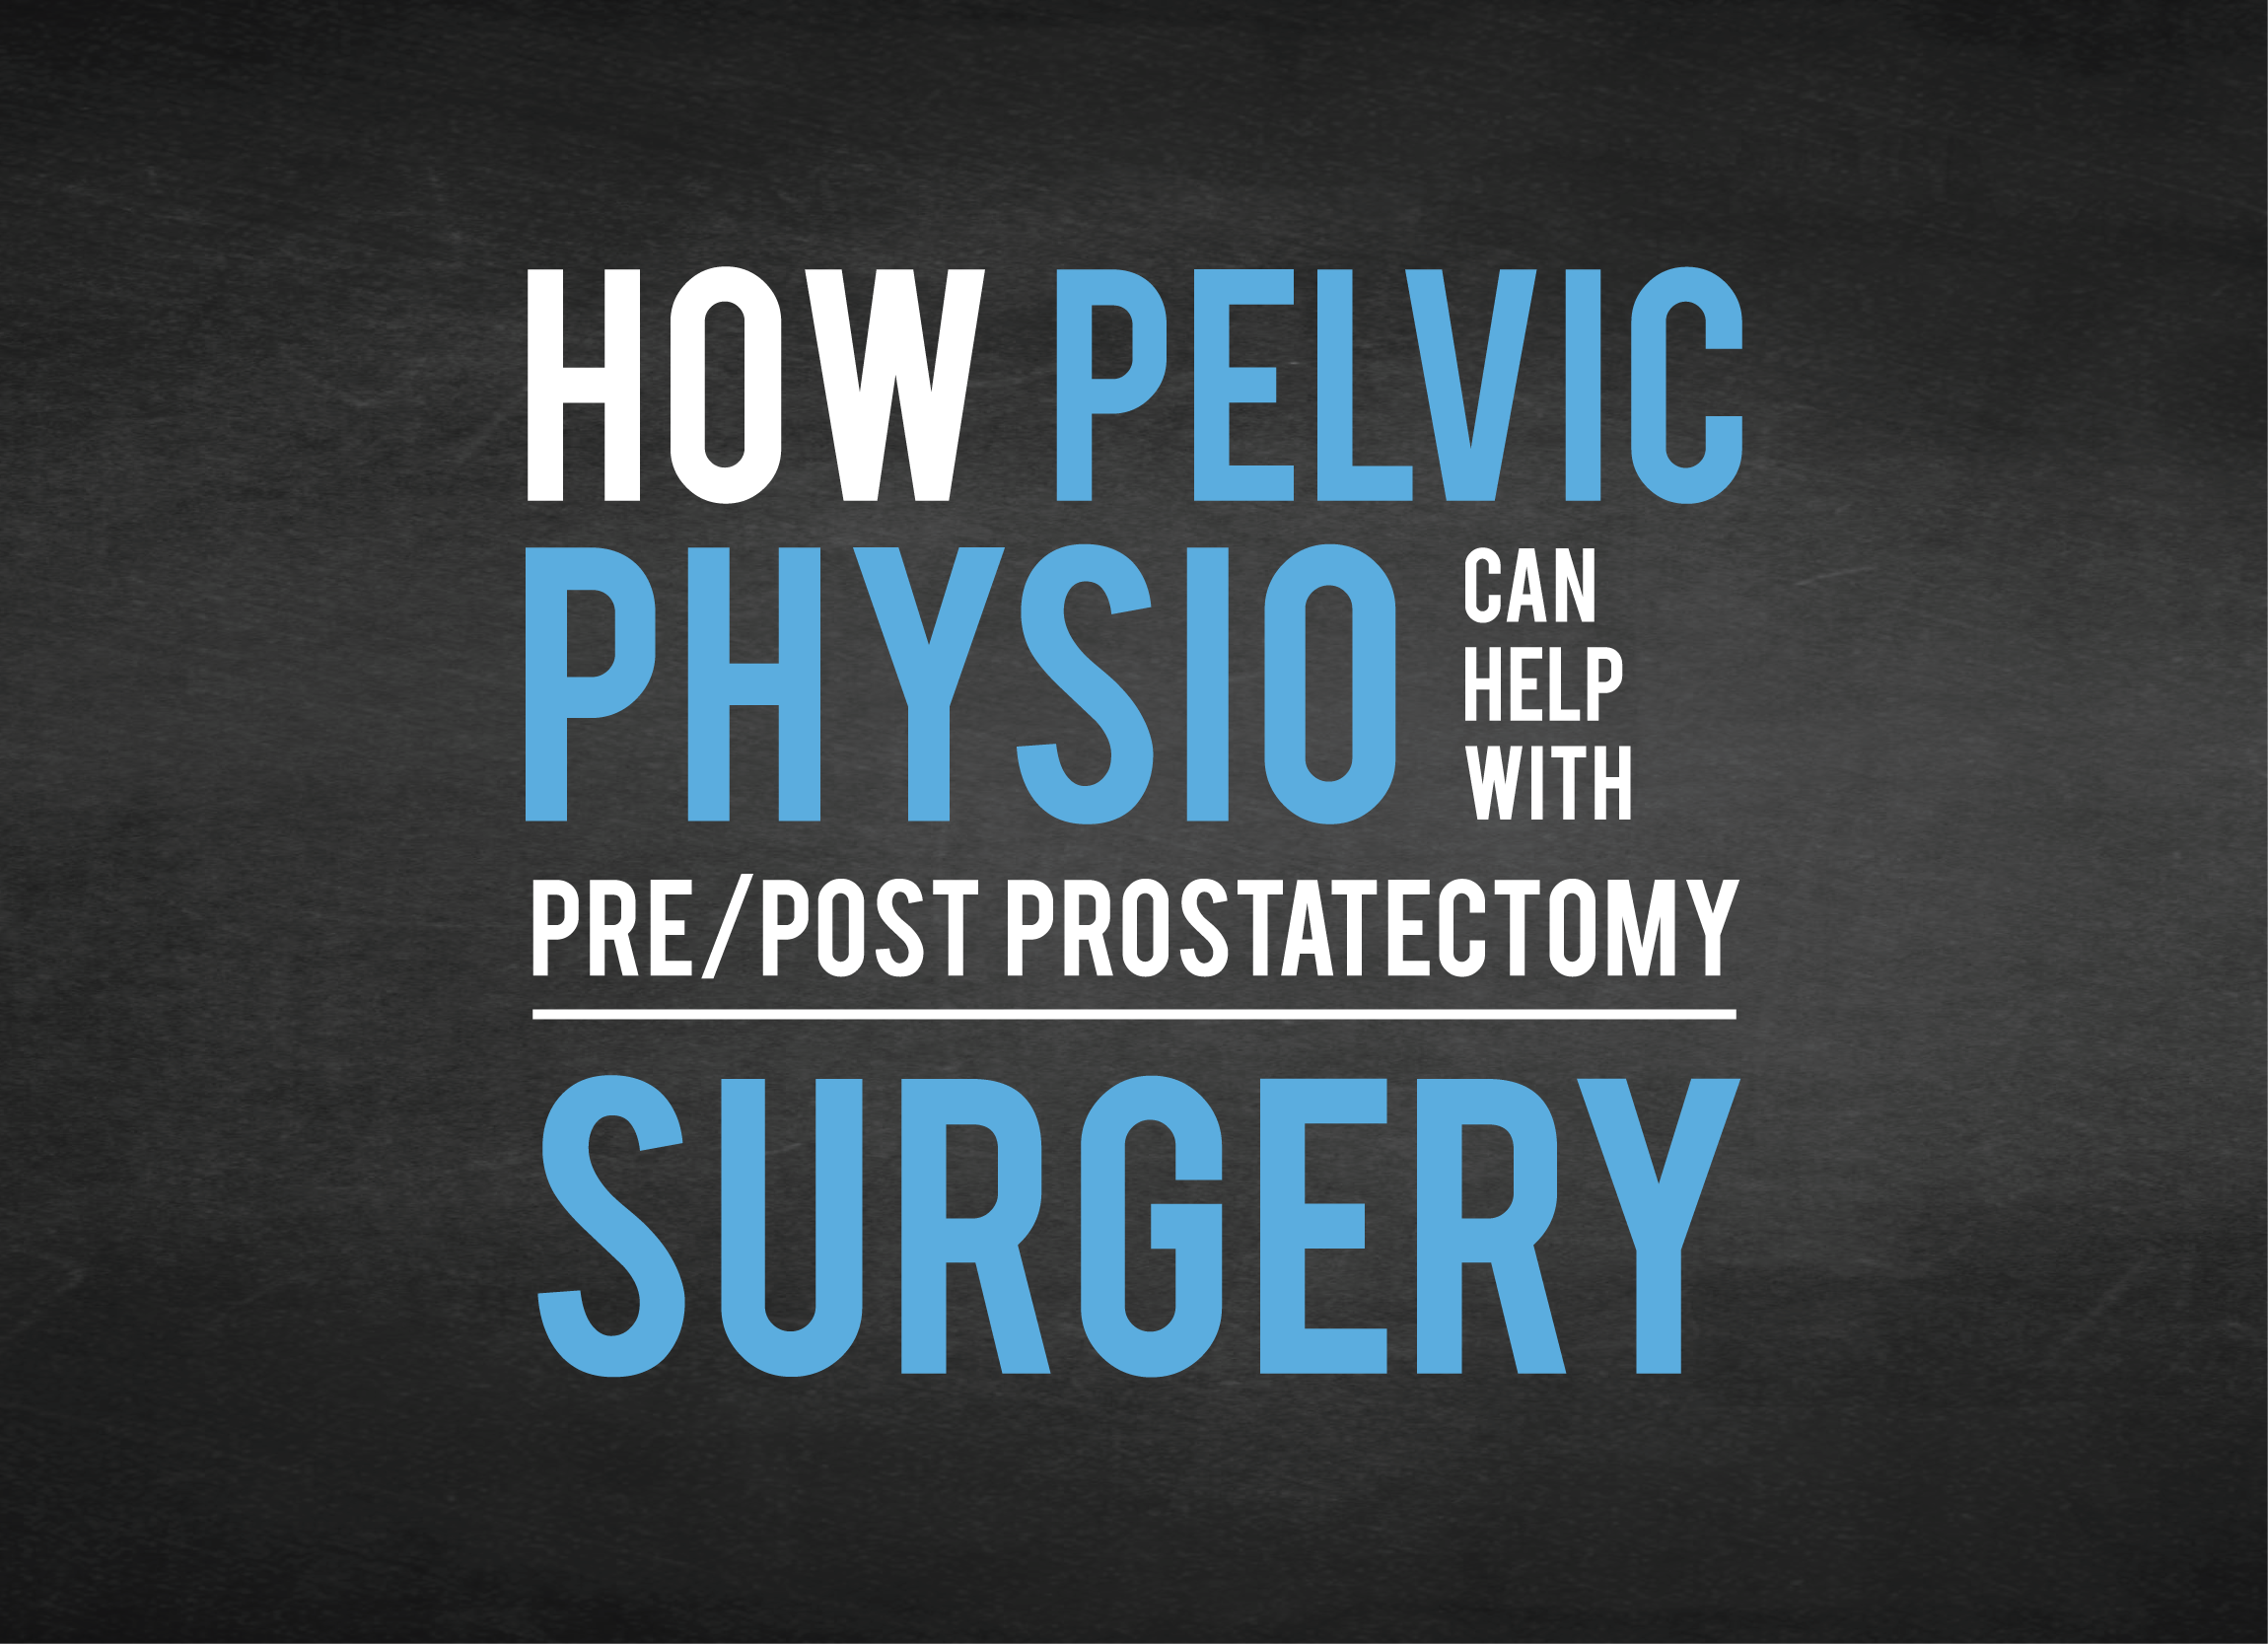 Blog 12 - How Pelvic Physio Can Help Pre/Post Prostatectomy